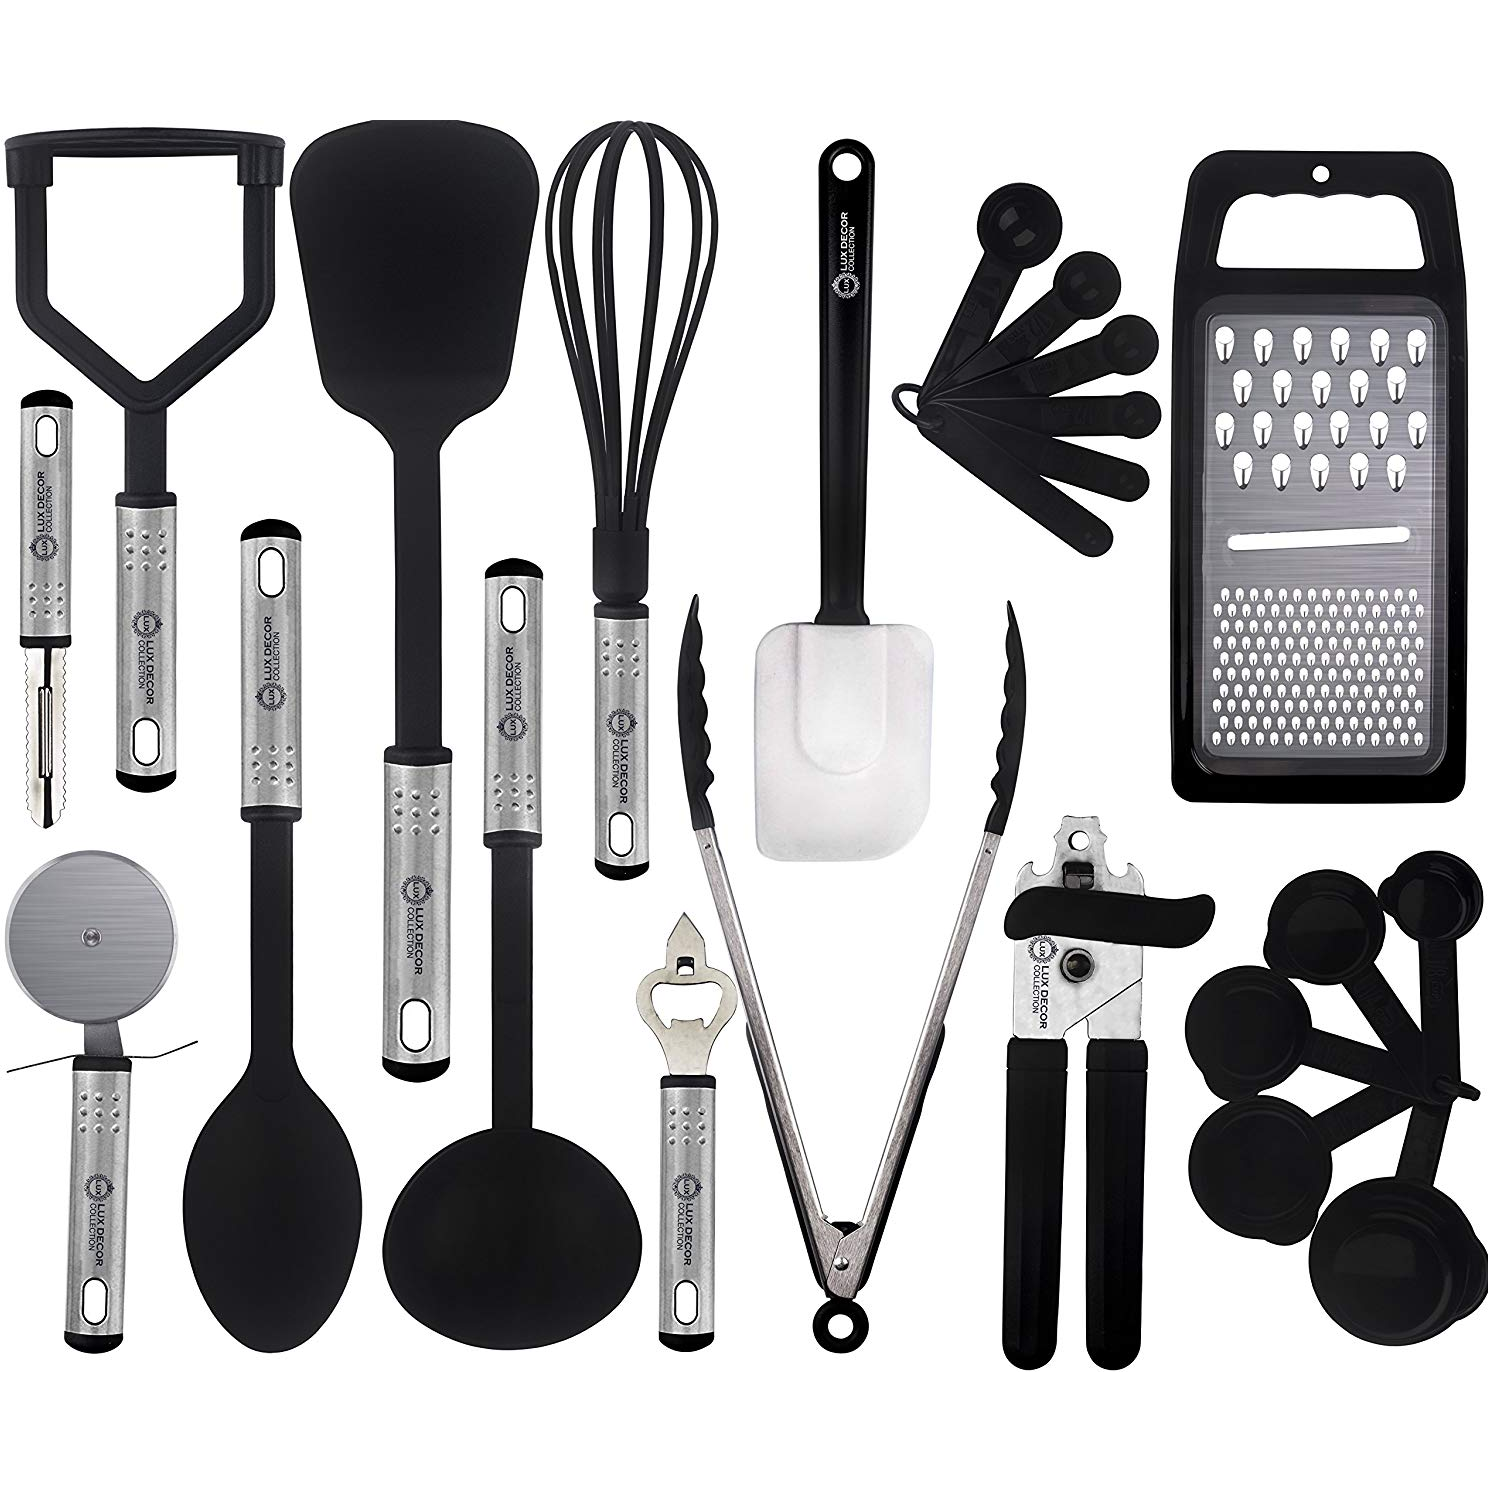 Cooking Utensils Set 23 Pieces Only $7.00!